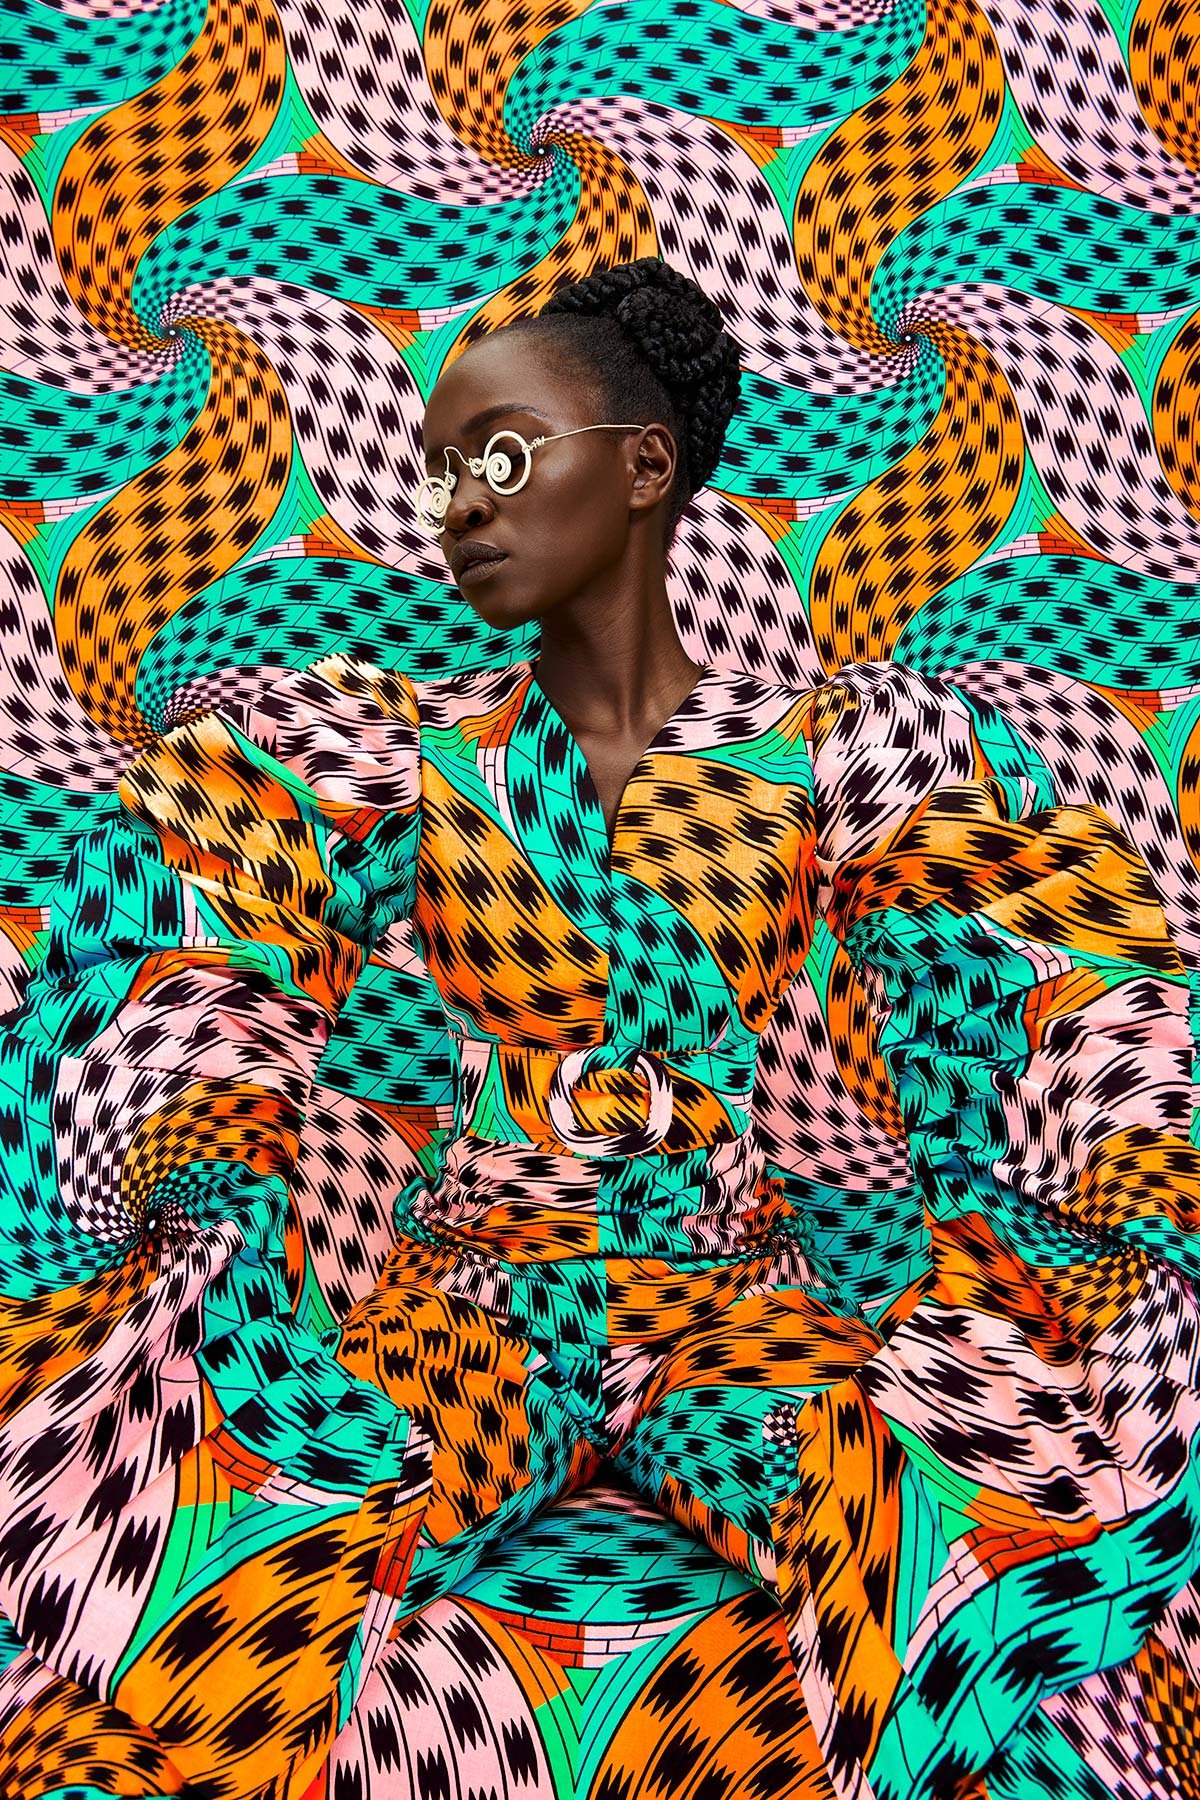 Thandiwe Muriu’s Photography Is an Exploration of Female Power Through Optical Illusion